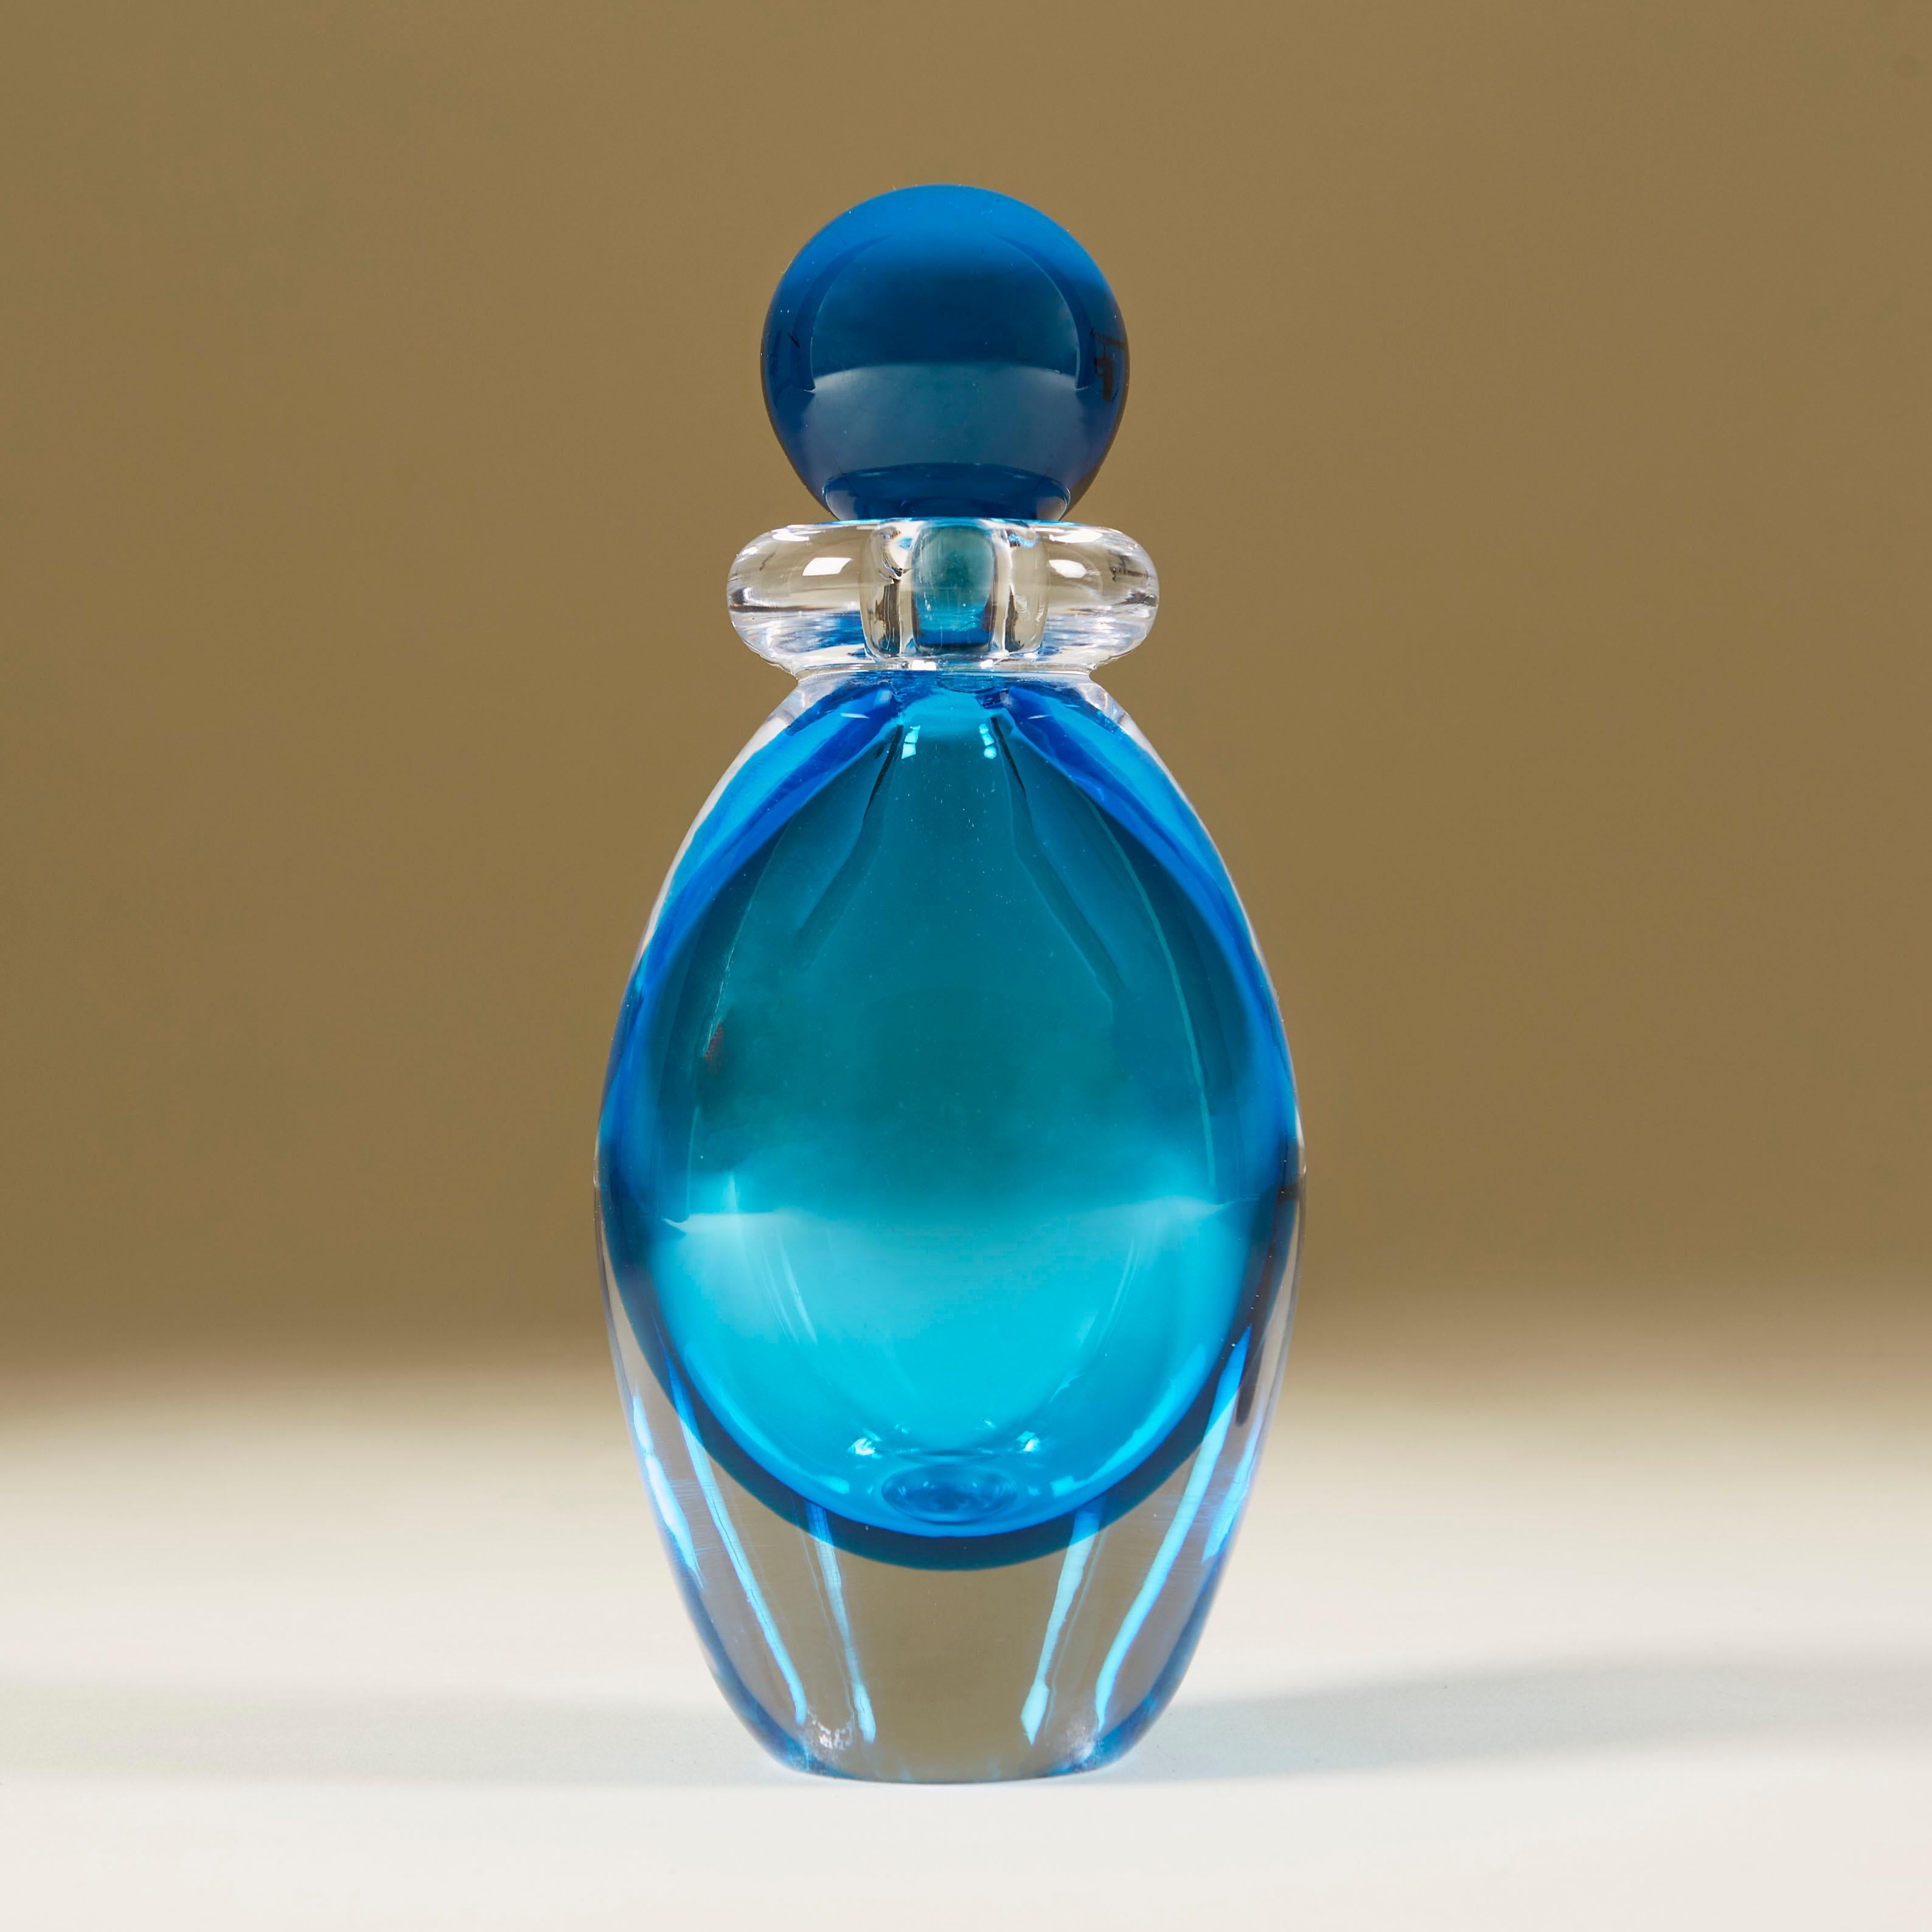 Rich aquamarine tall perfume bottle cased in clear Murano glass with clear glass collar and aqua marine ball stopper.
